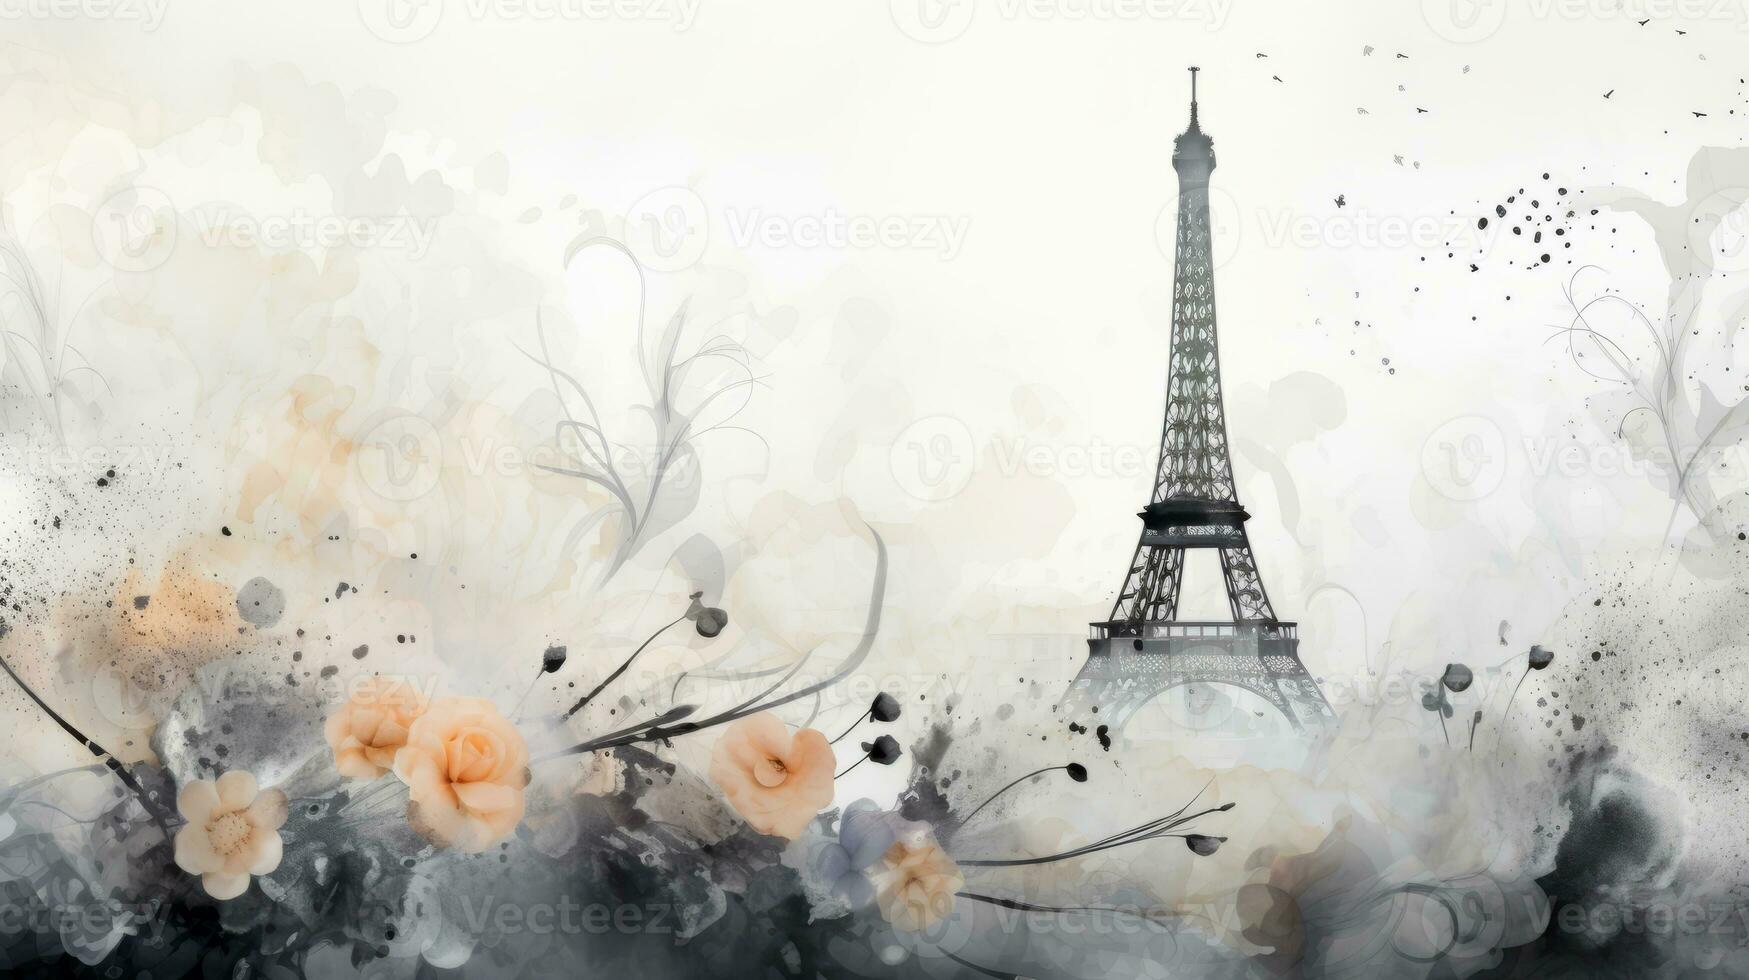 Watercolor thin black outline flowers in the foreground against a faded misty background of Paris photo